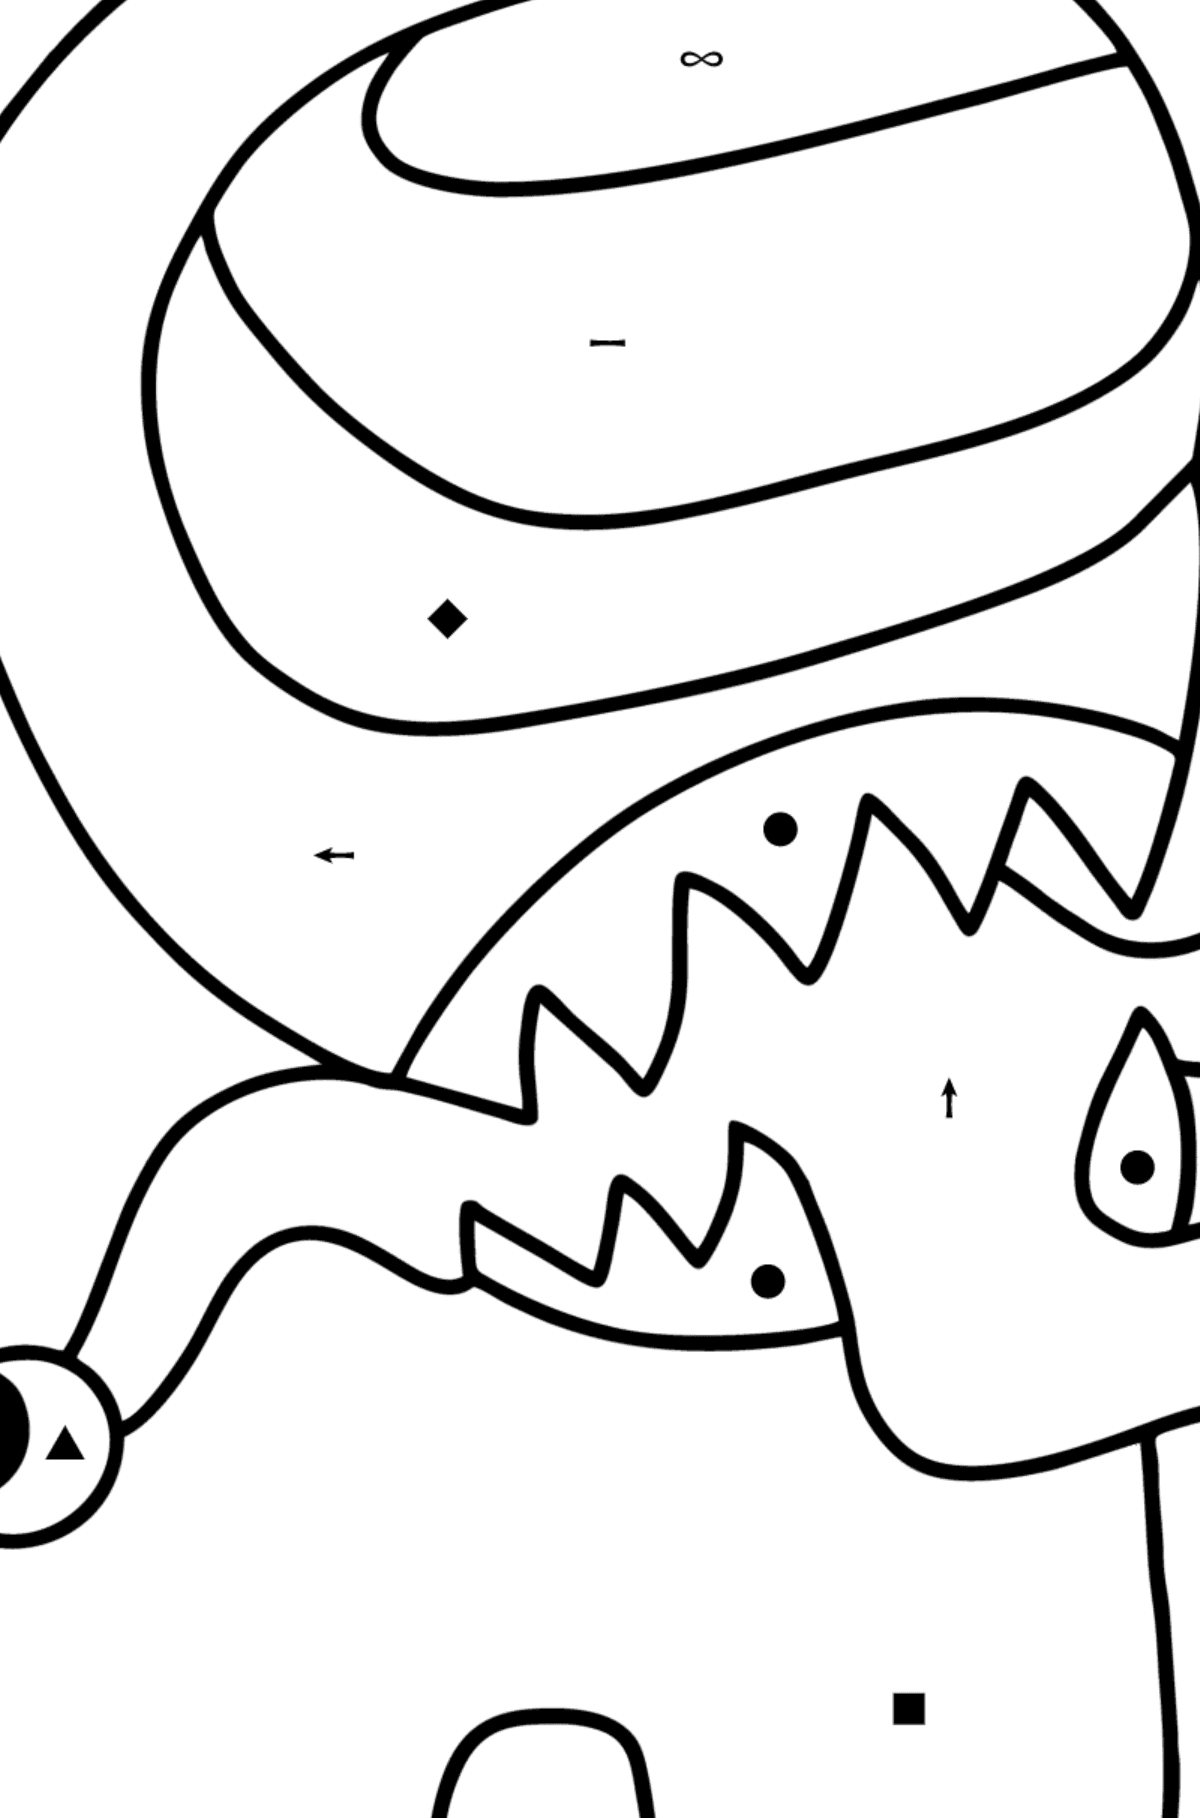 Among Us coloring page for Free - Coloring by Symbols for Kids